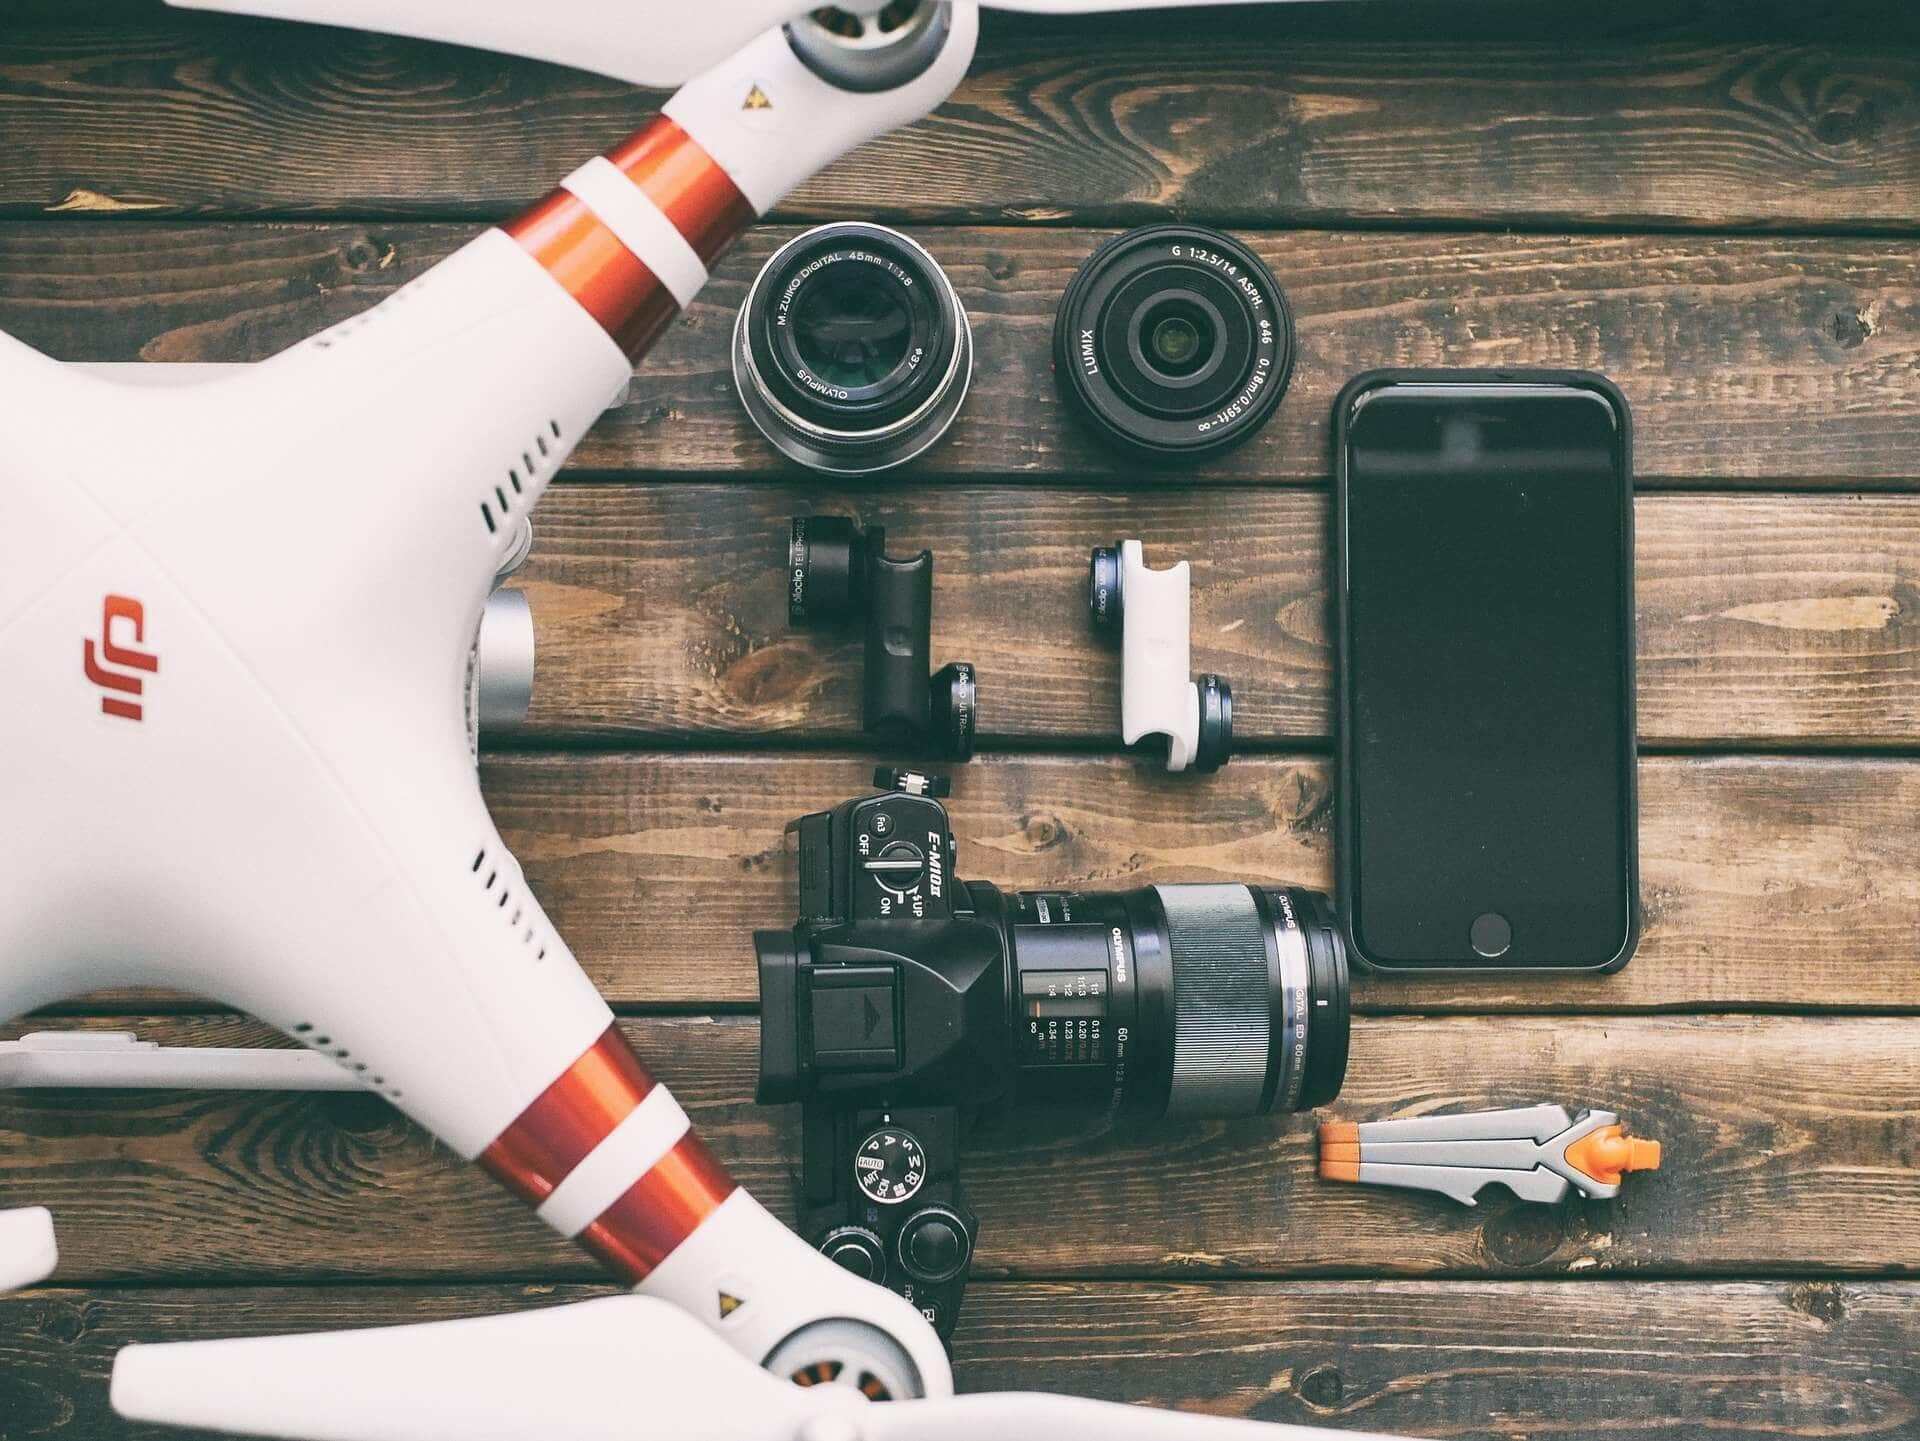 What Are Some Benefits Of Drones And Smartphone Cameras?